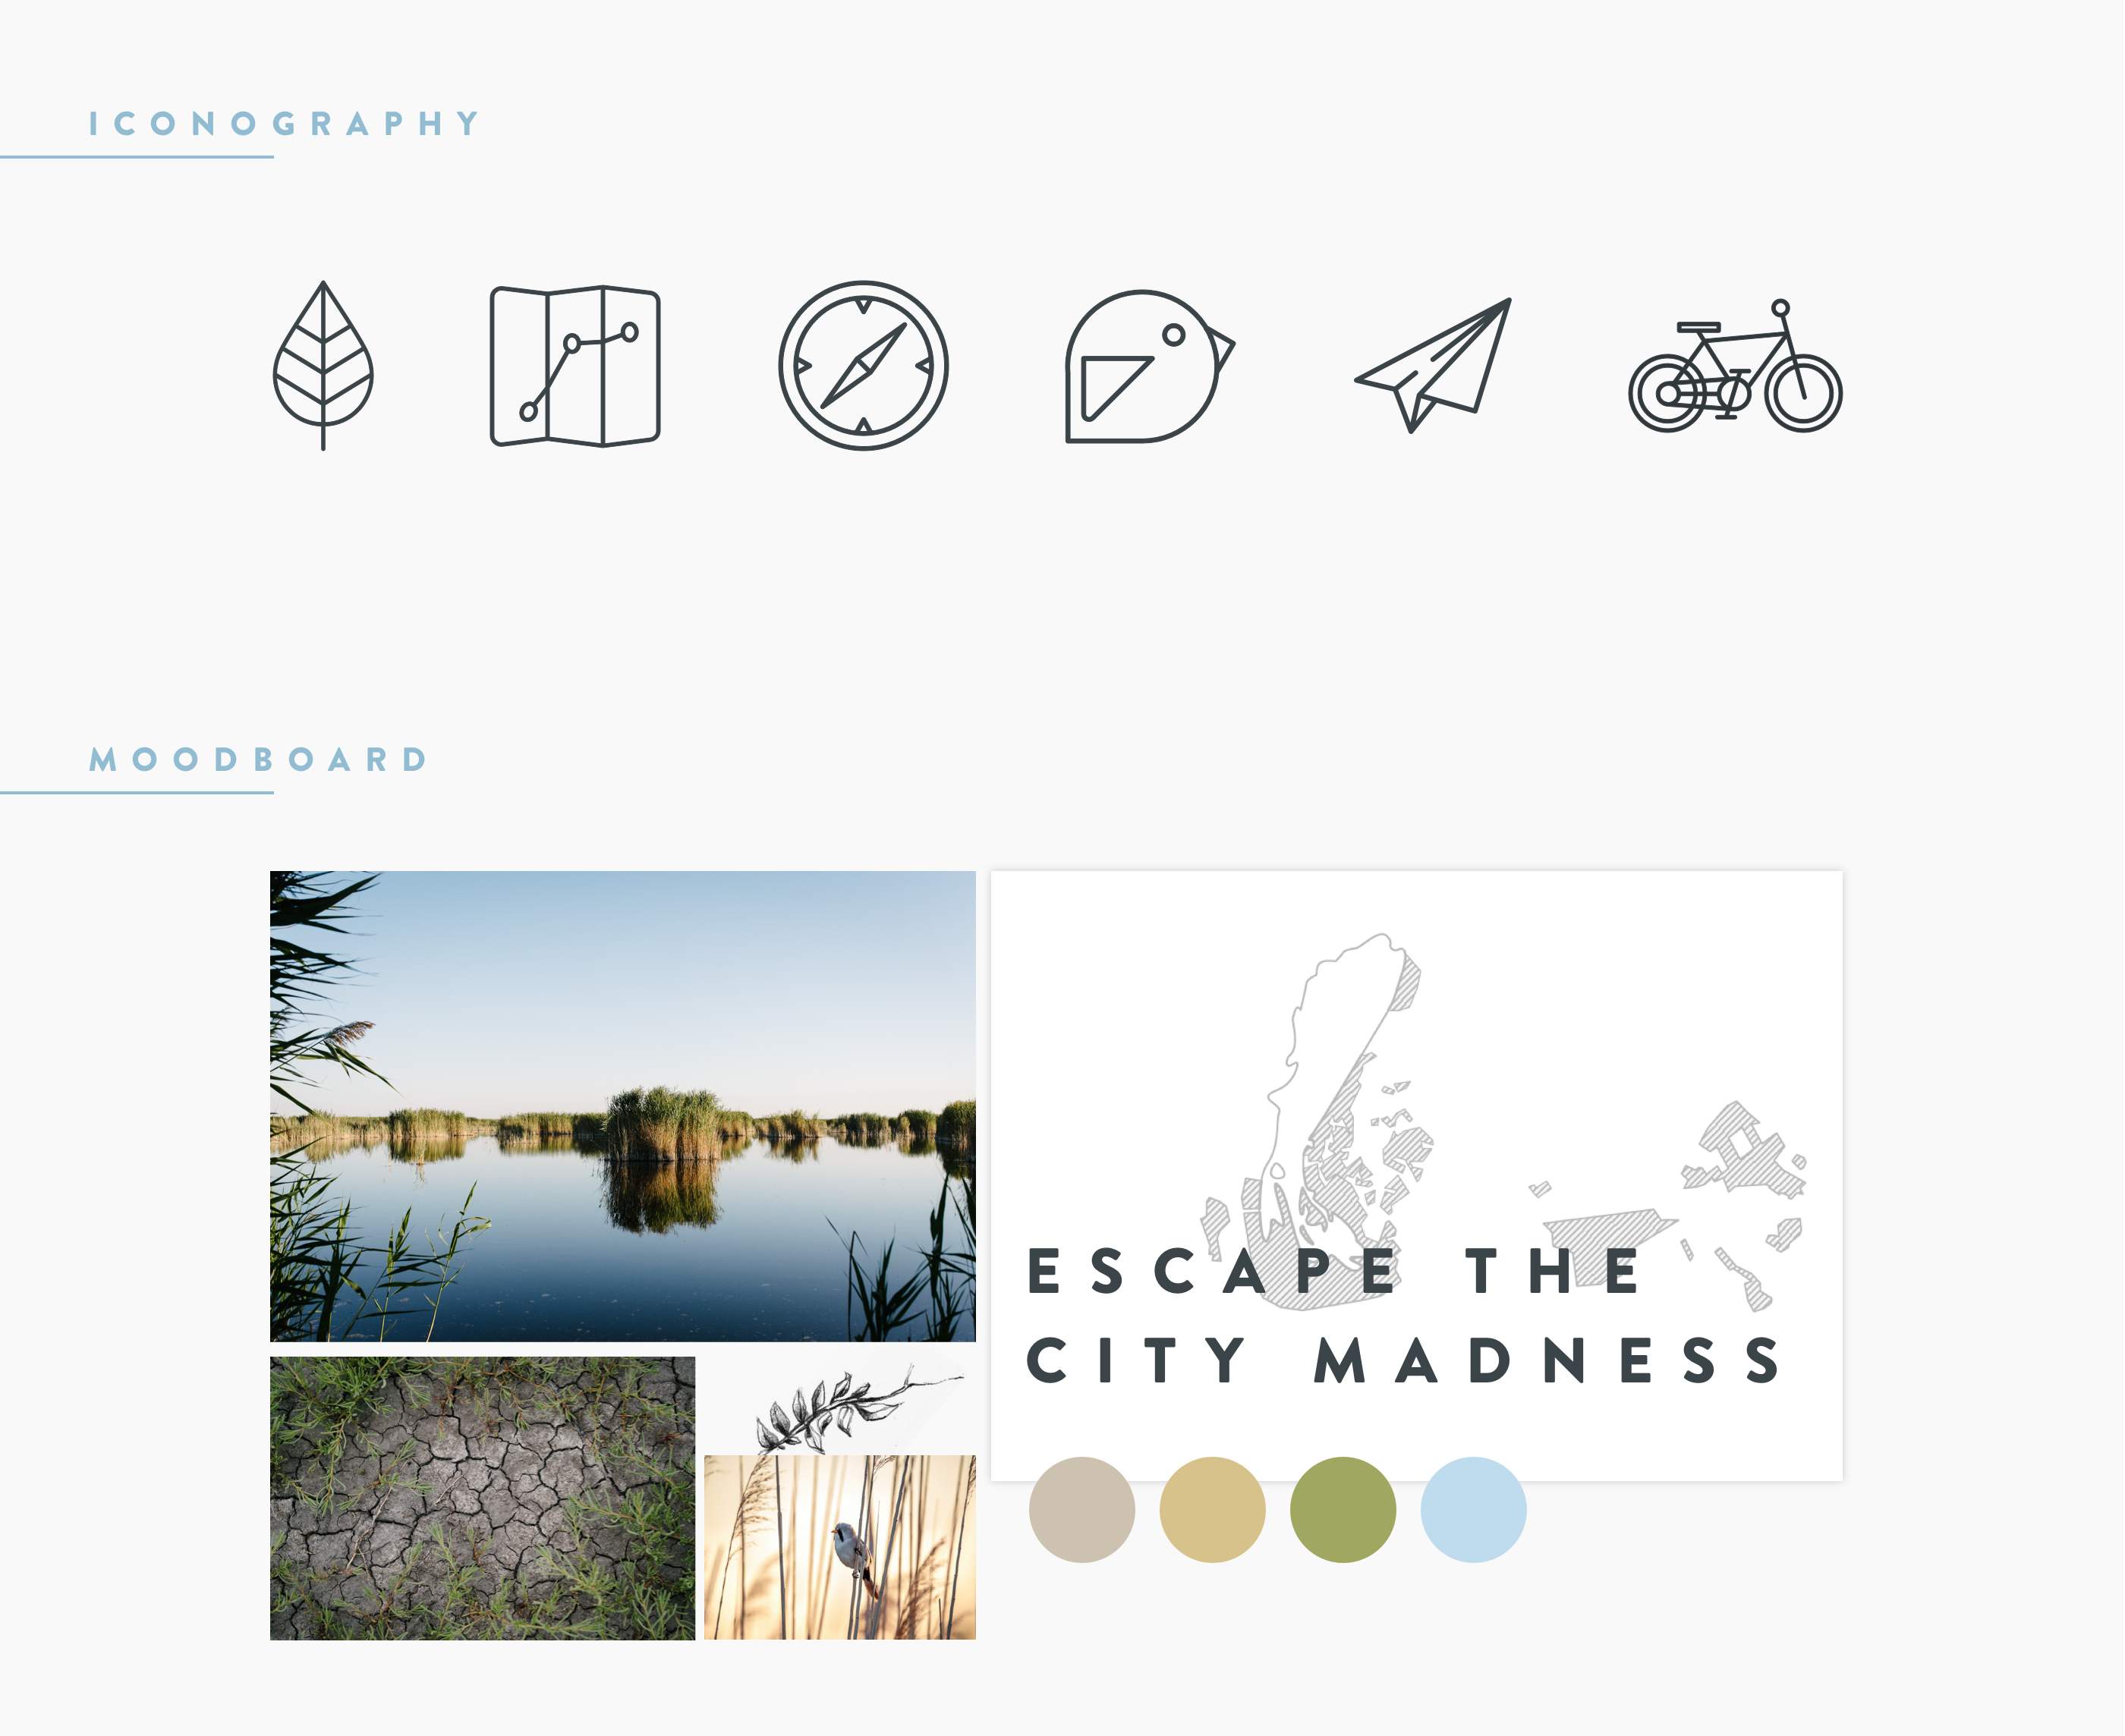 Nationalpark Neusiedlersee - Seewinkel iconography and moodboards